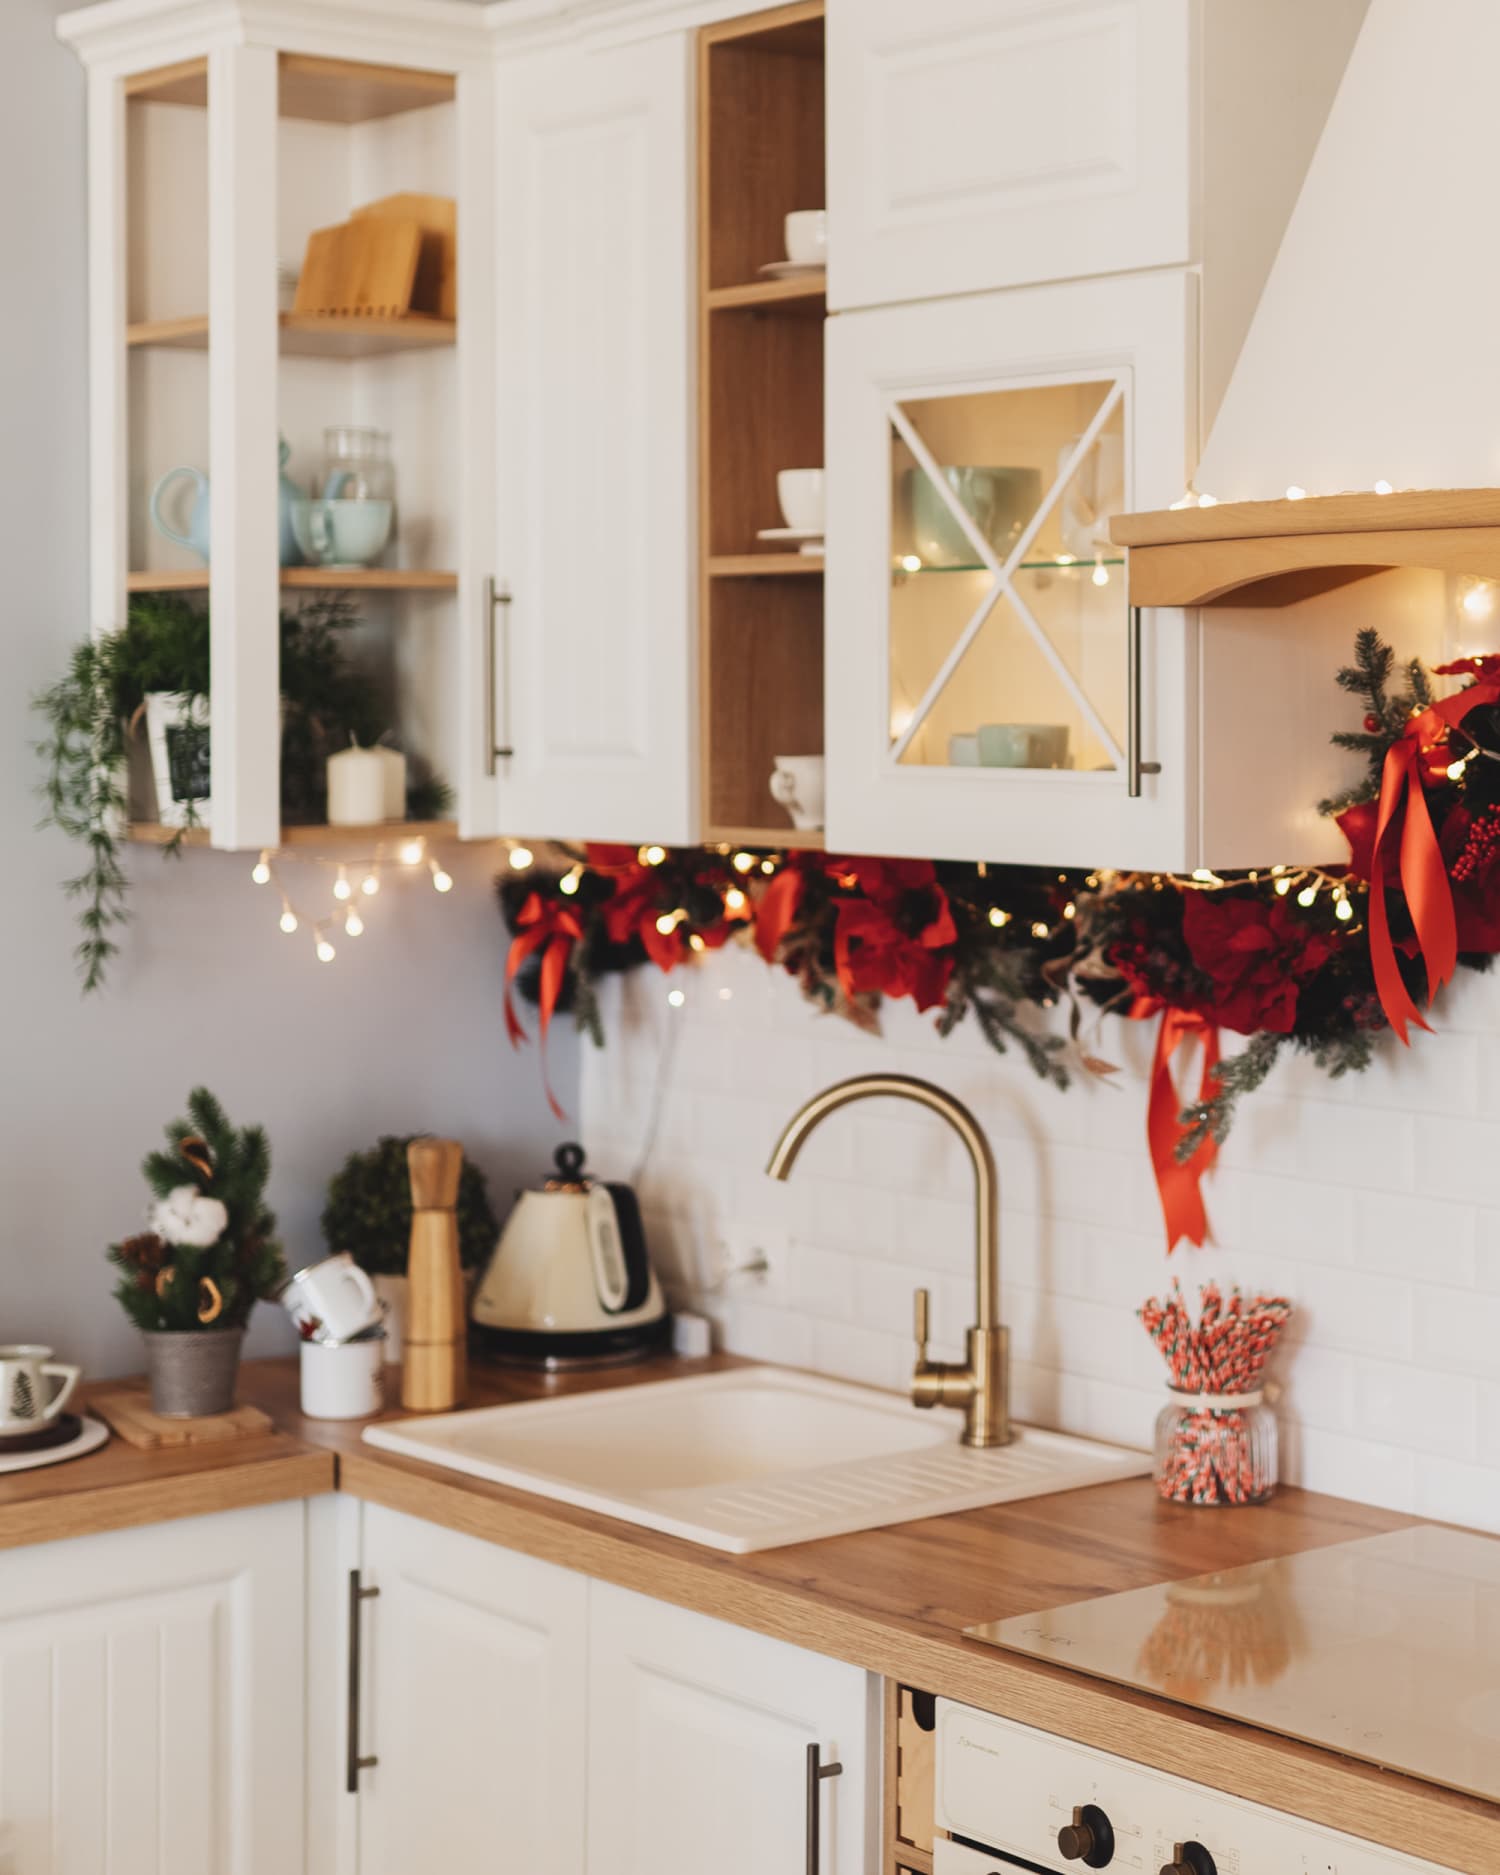 12 Easy Christmas Decor Ideas to Turn Your Home into a Winter Wonderland